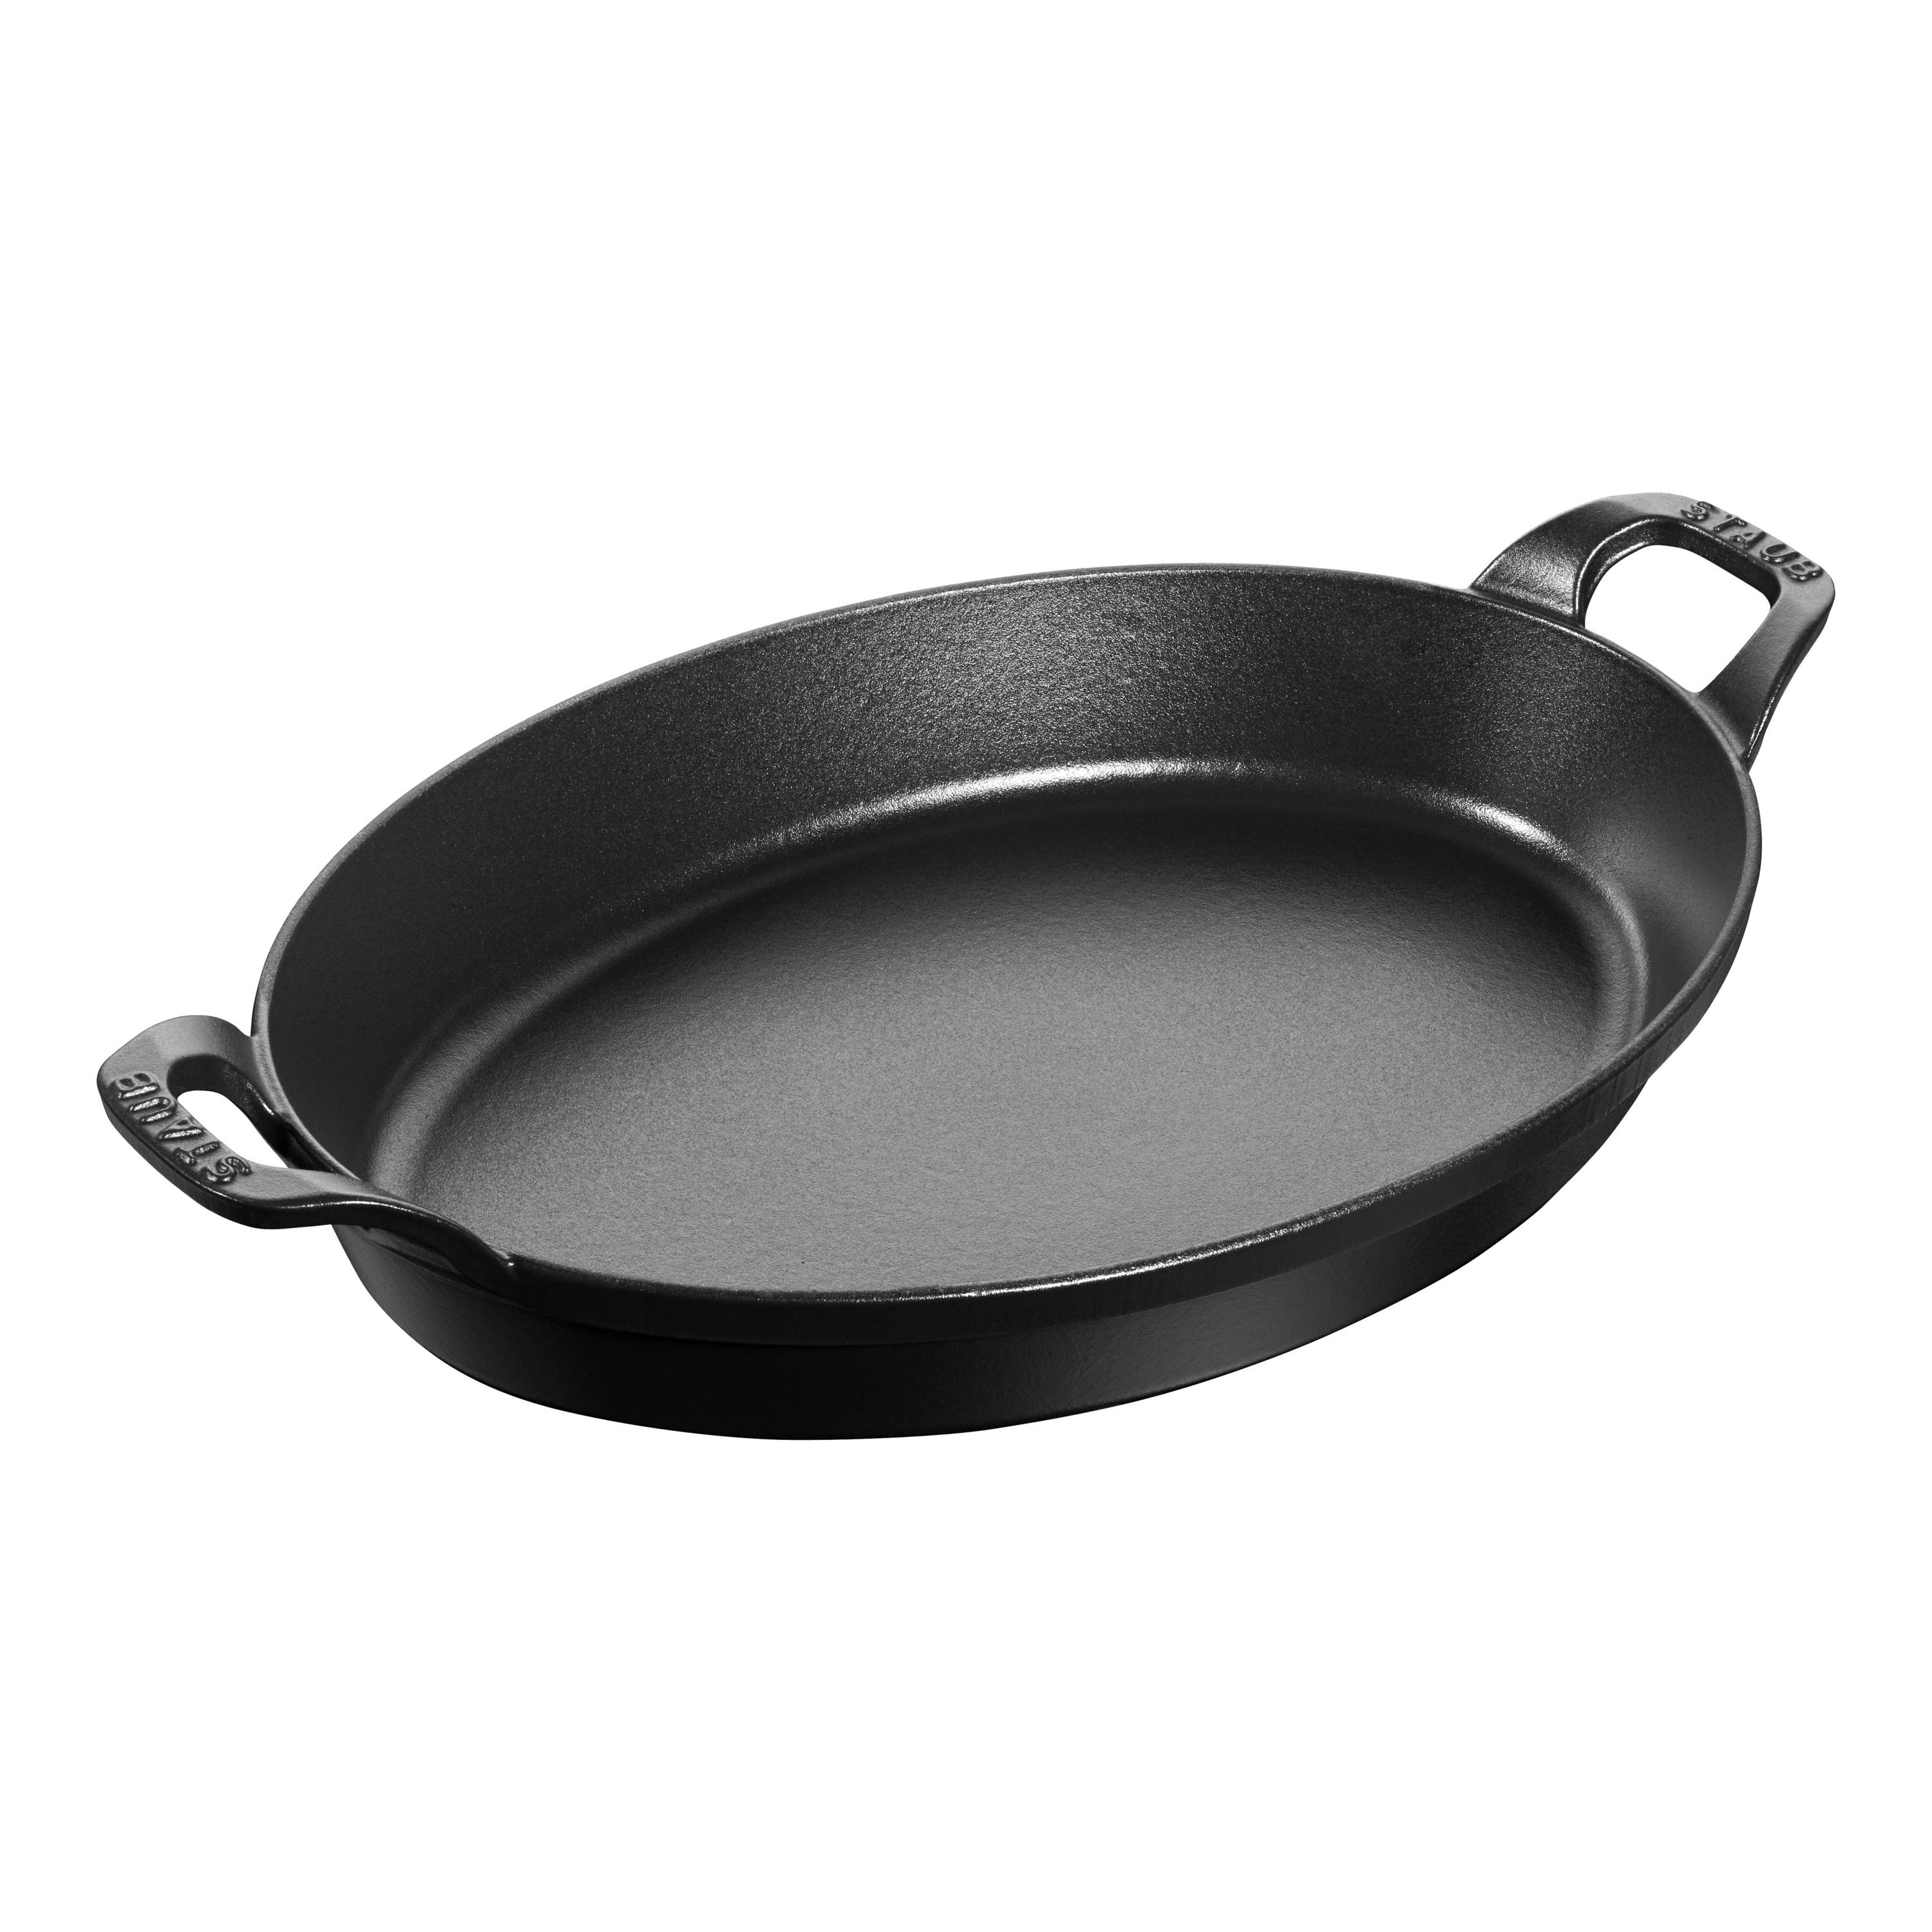 Staub Cast Iron 12.75-inch x 5.25-inch Loaf Pan - Matte Black, 9-inch -  Dillons Food Stores